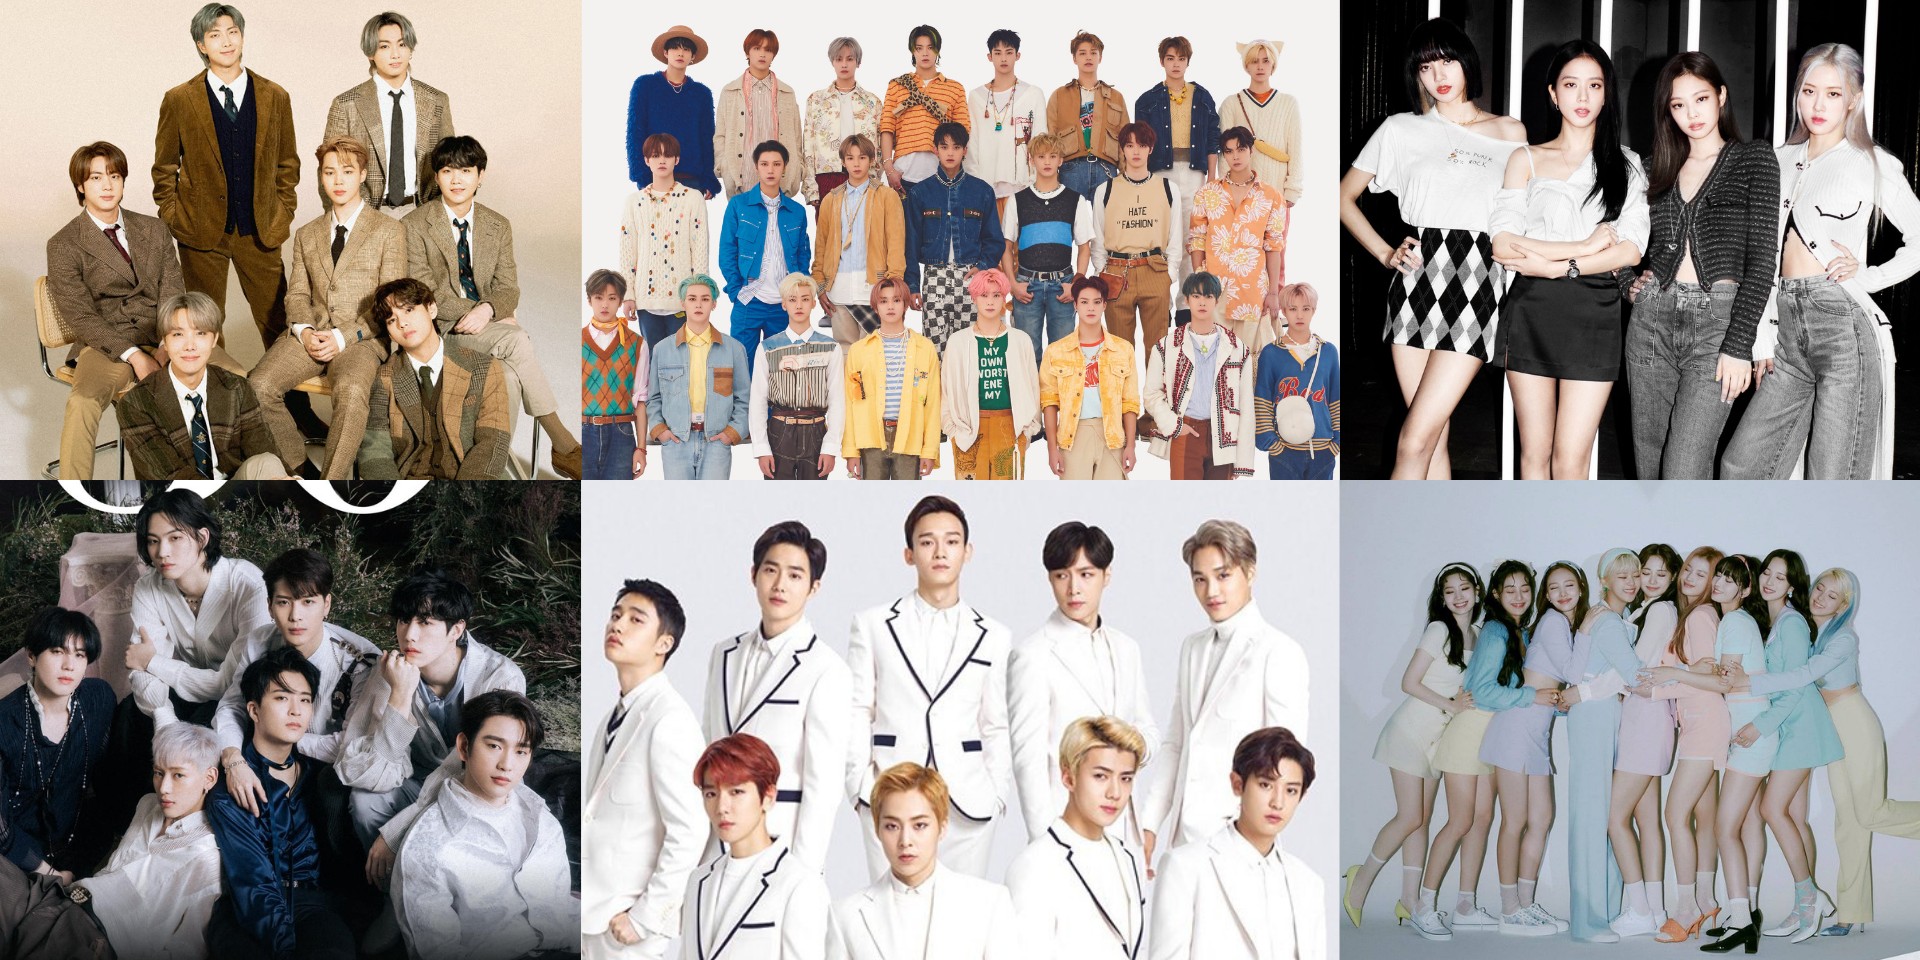 Who do you like the most/which K-pop group is better and why, NCT